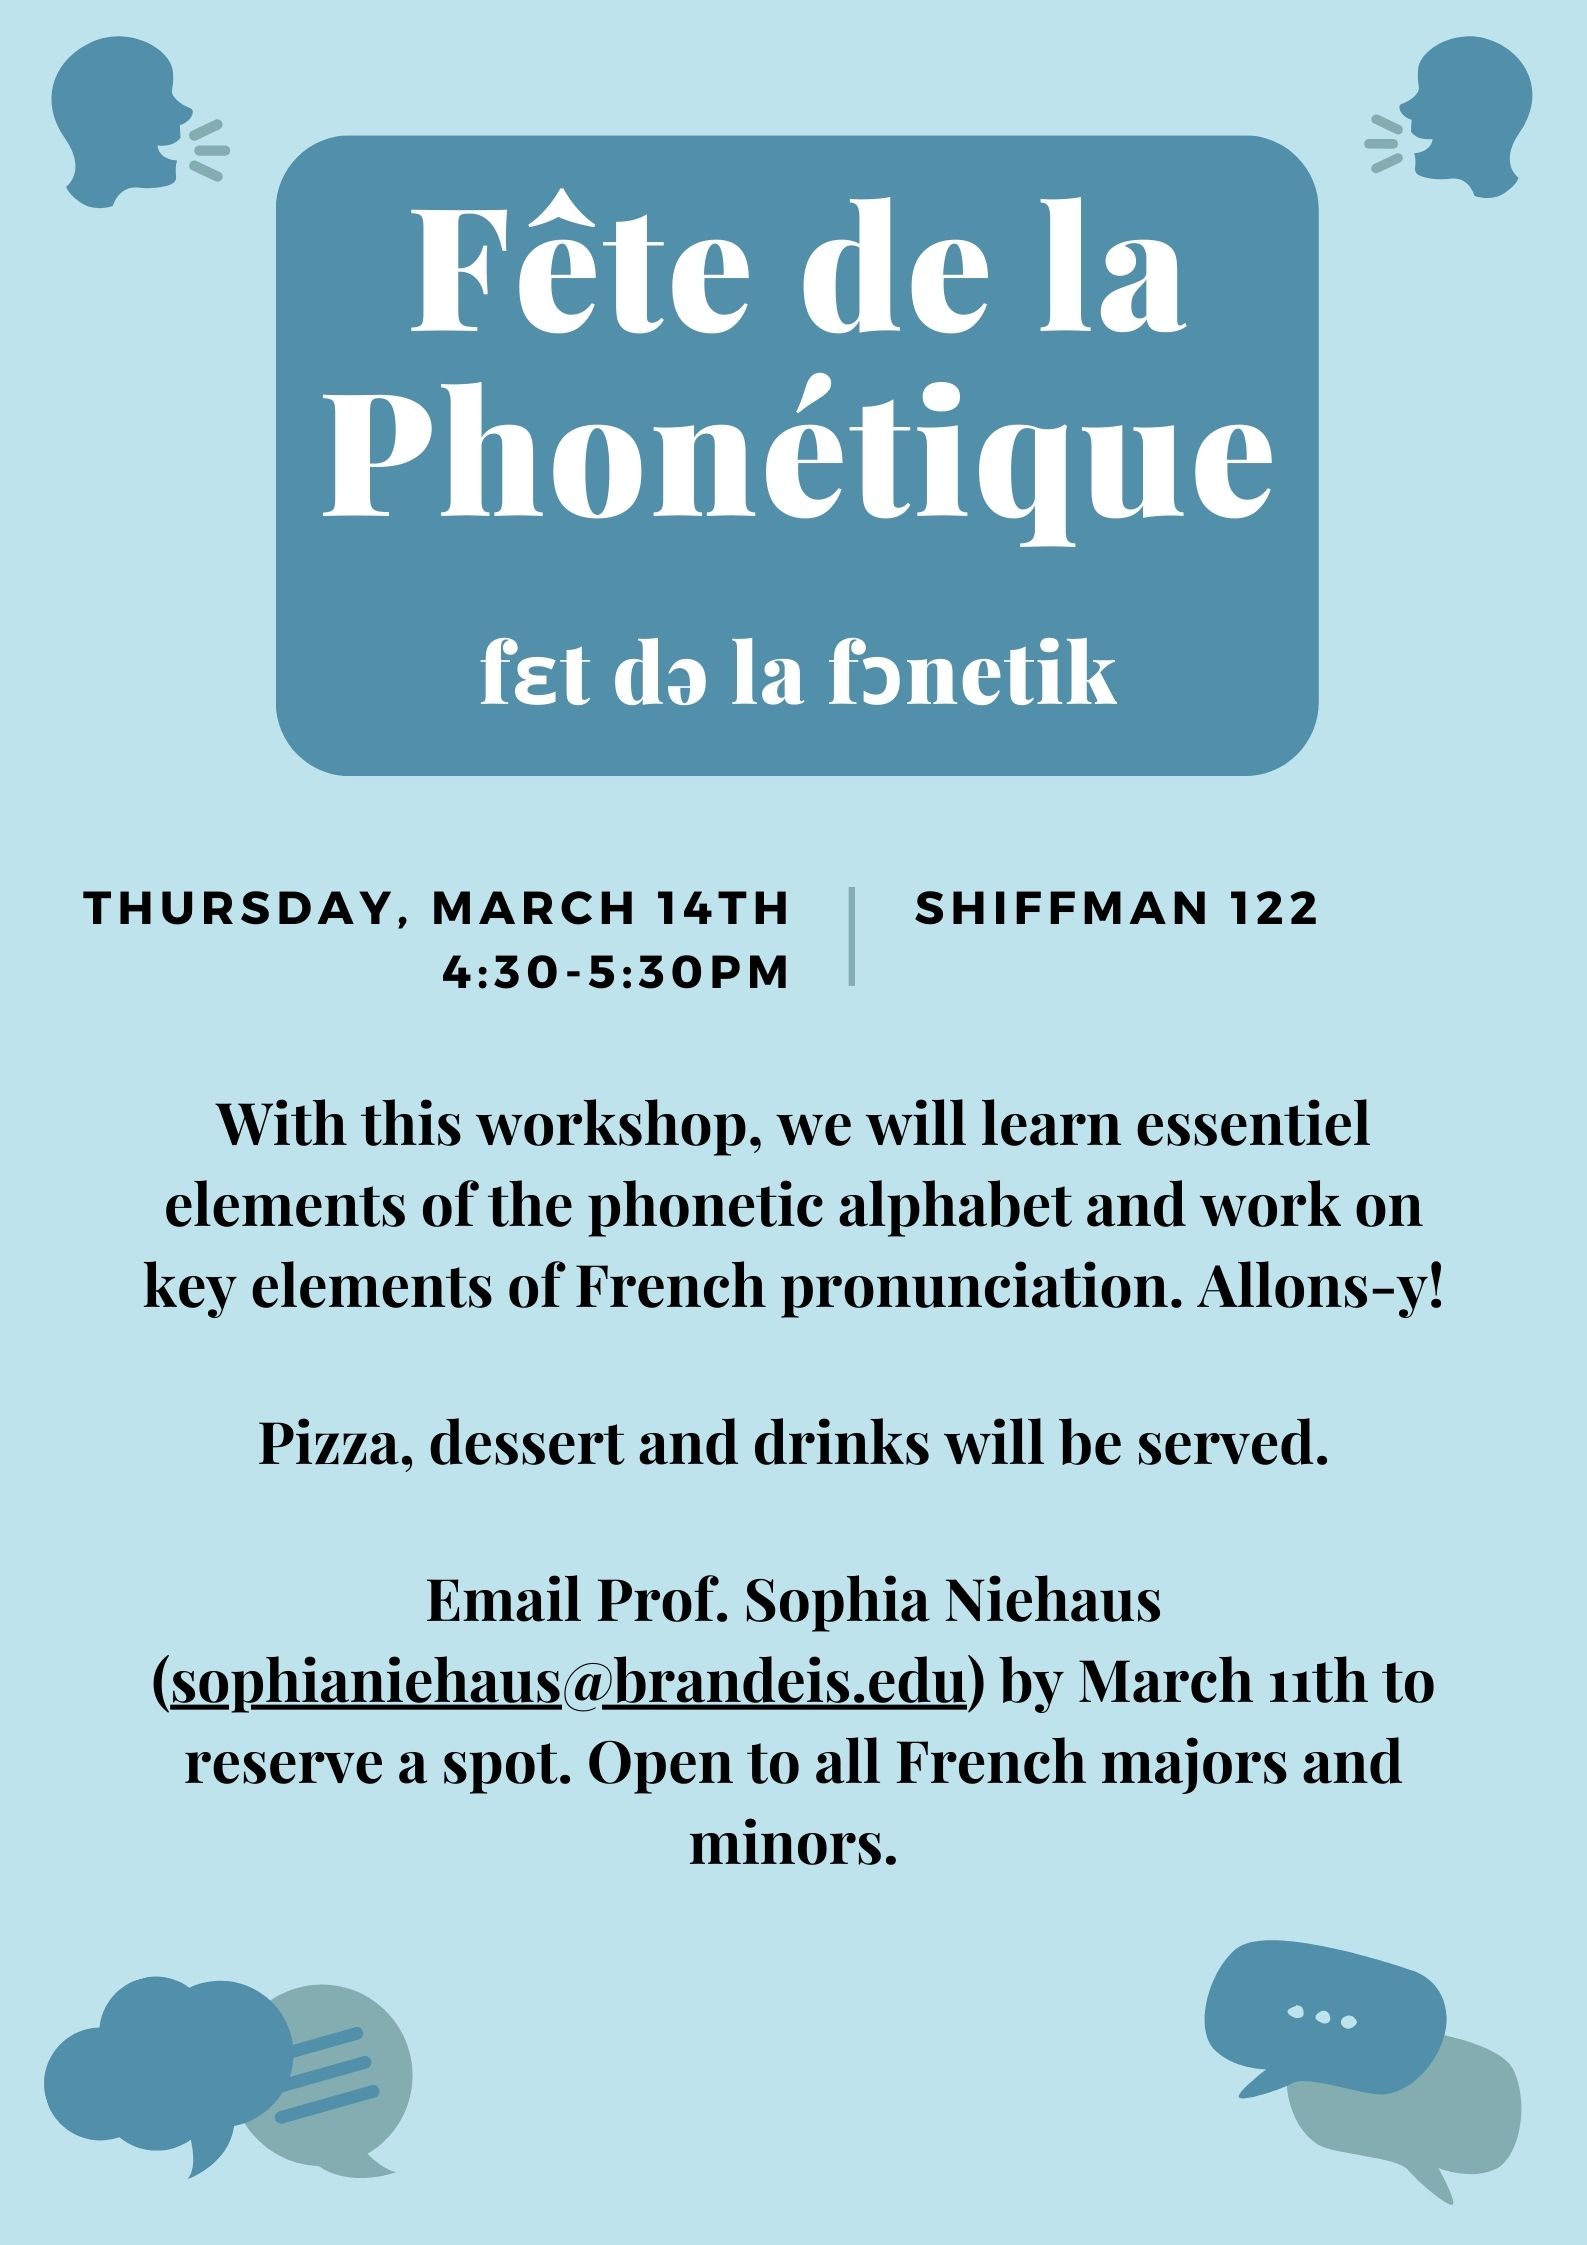 poster for phonetics workshop. images of conversation bubbles. text is same as below.